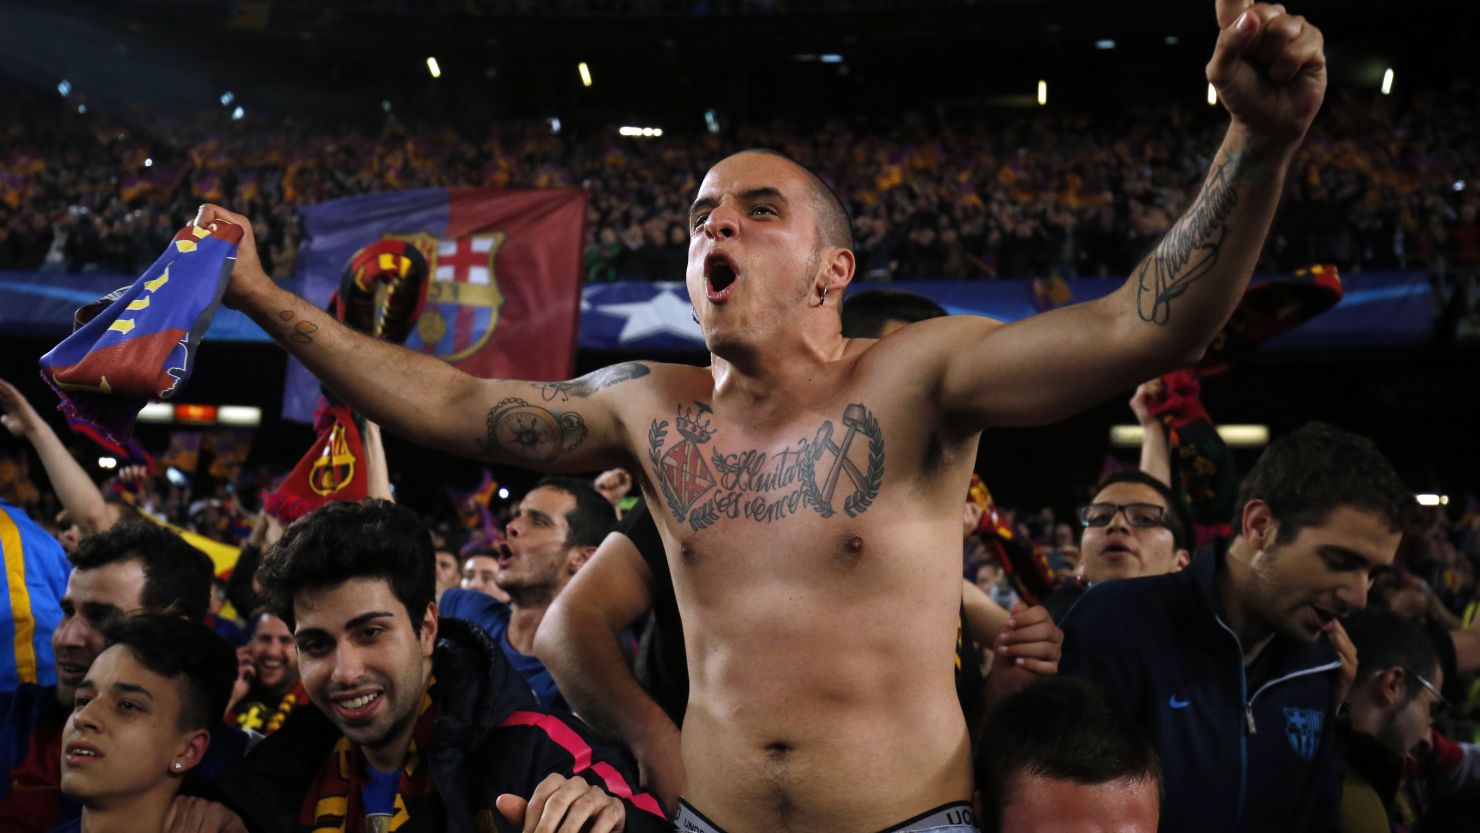 Barcelona fans celebrate the club's momentous victory over PSG at the Camp Nou stadium, March 8, 2017.